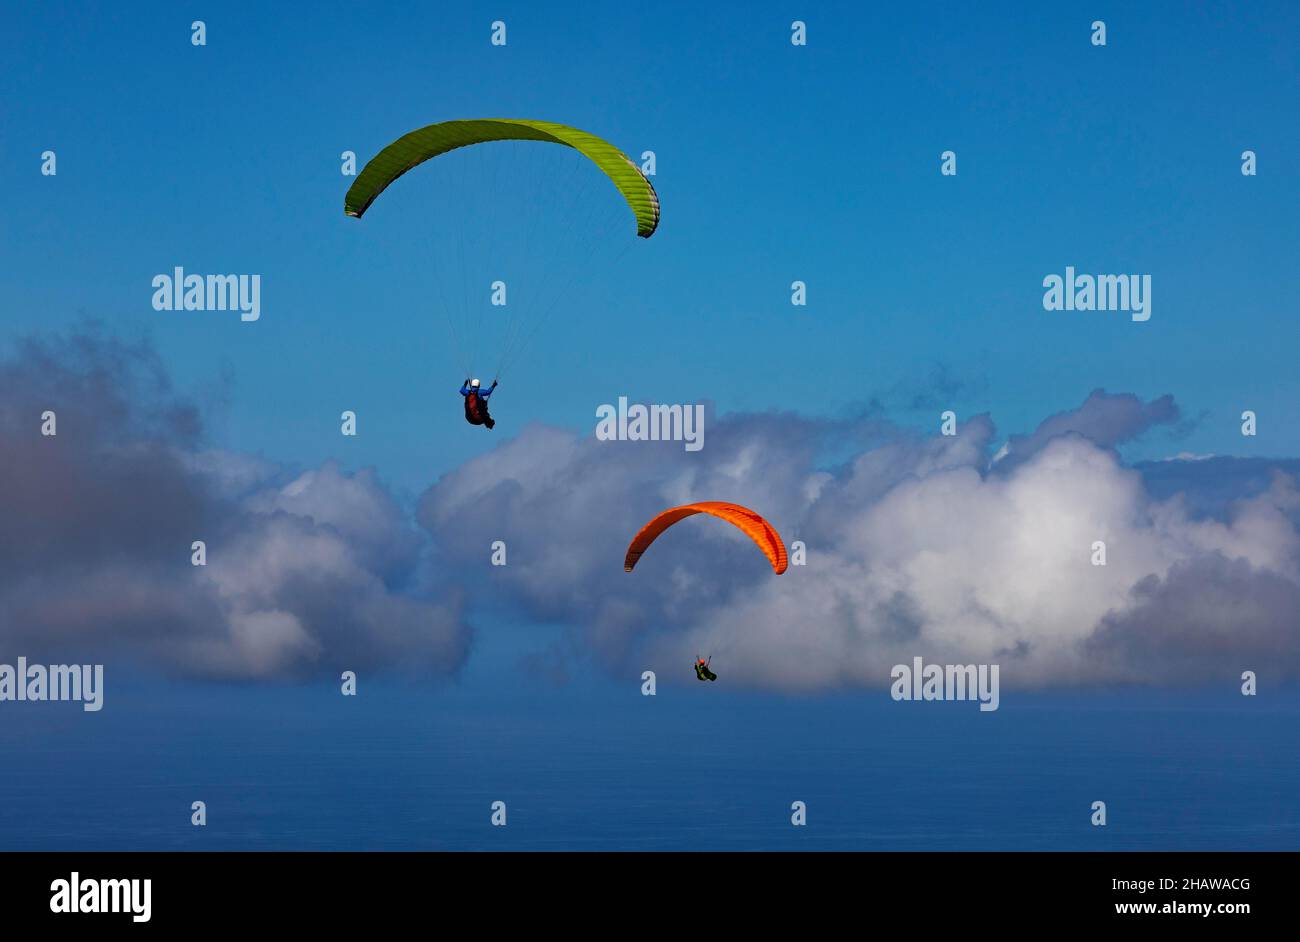 Paraglider with dramatic cloudy sky after take-off from Pico Barrosa, Sao Miguel Island, Azores, Portugal Stock Photo